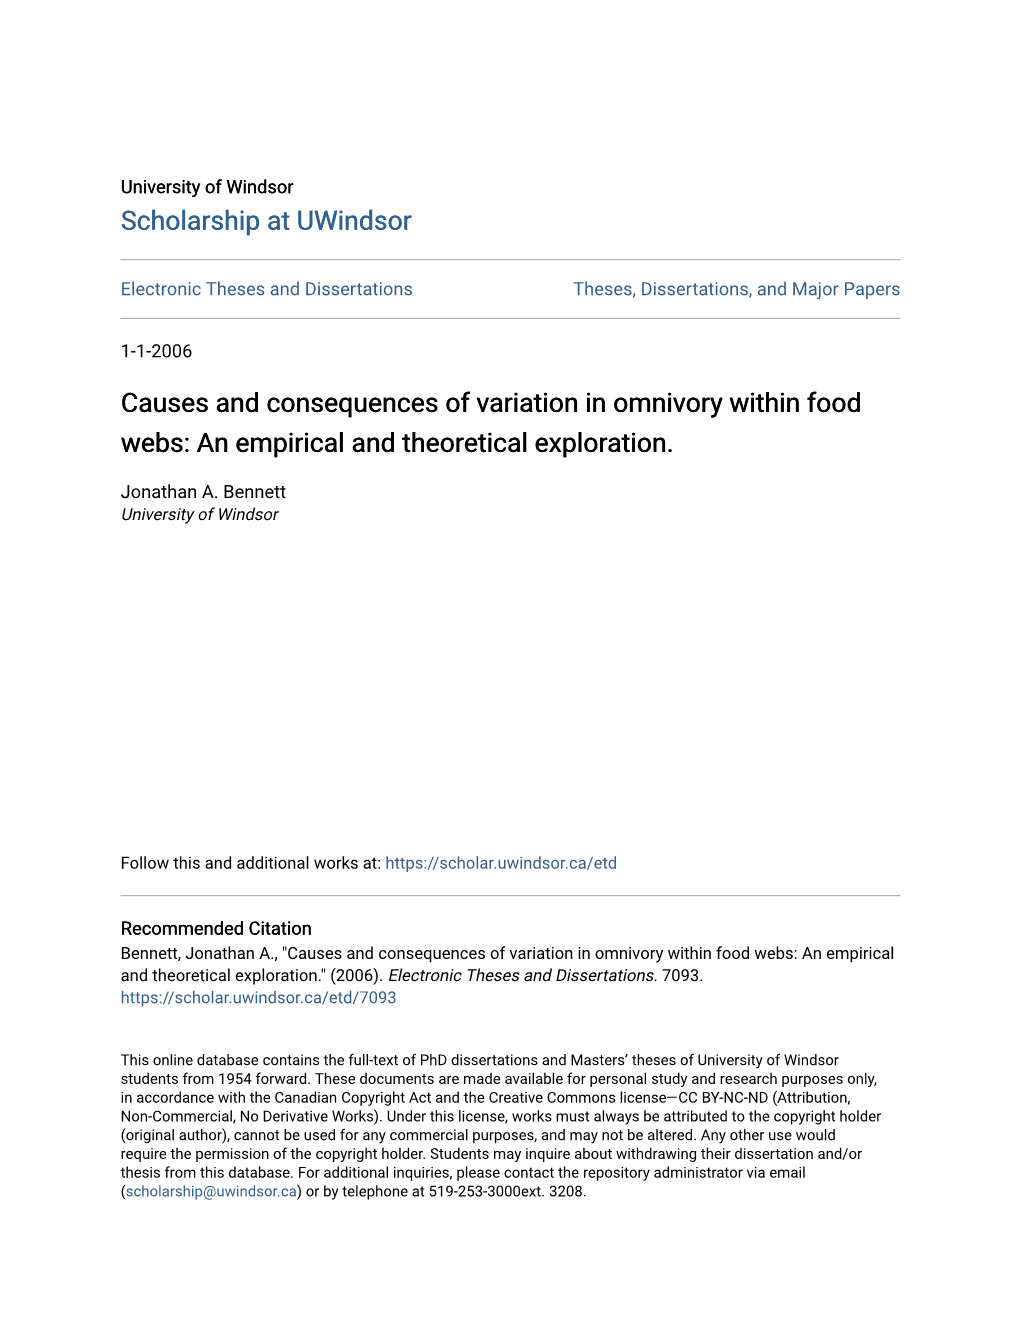 Causes and Consequences of Variation in Omnivory Within Food Webs: an Empirical and Theoretical Exploration